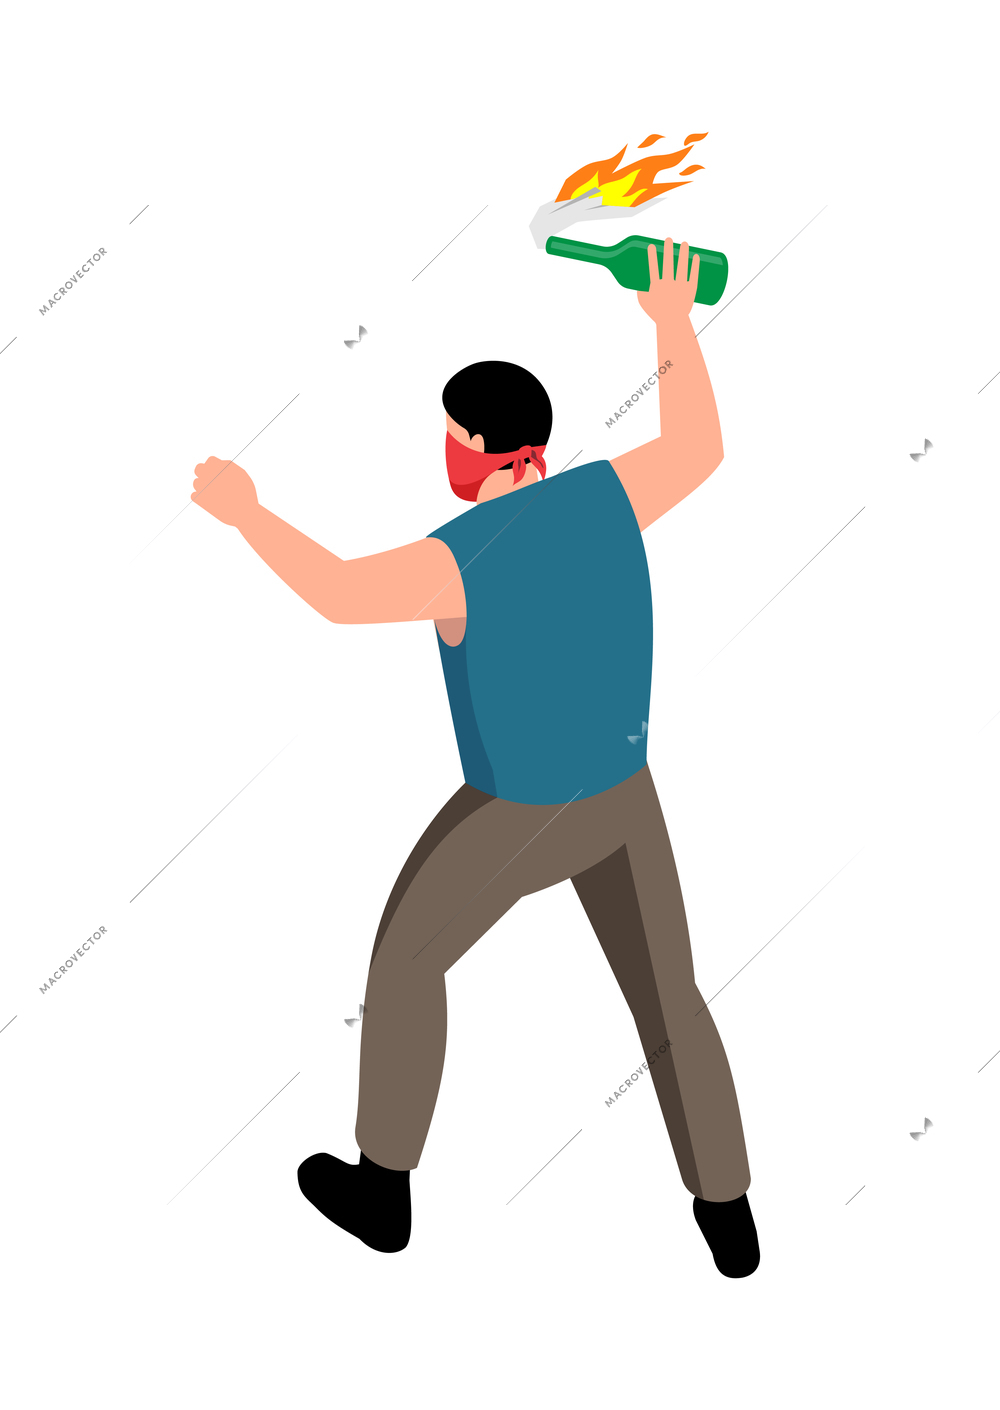 Isometric icon with man holding molotov cocktail 3d vector illustration